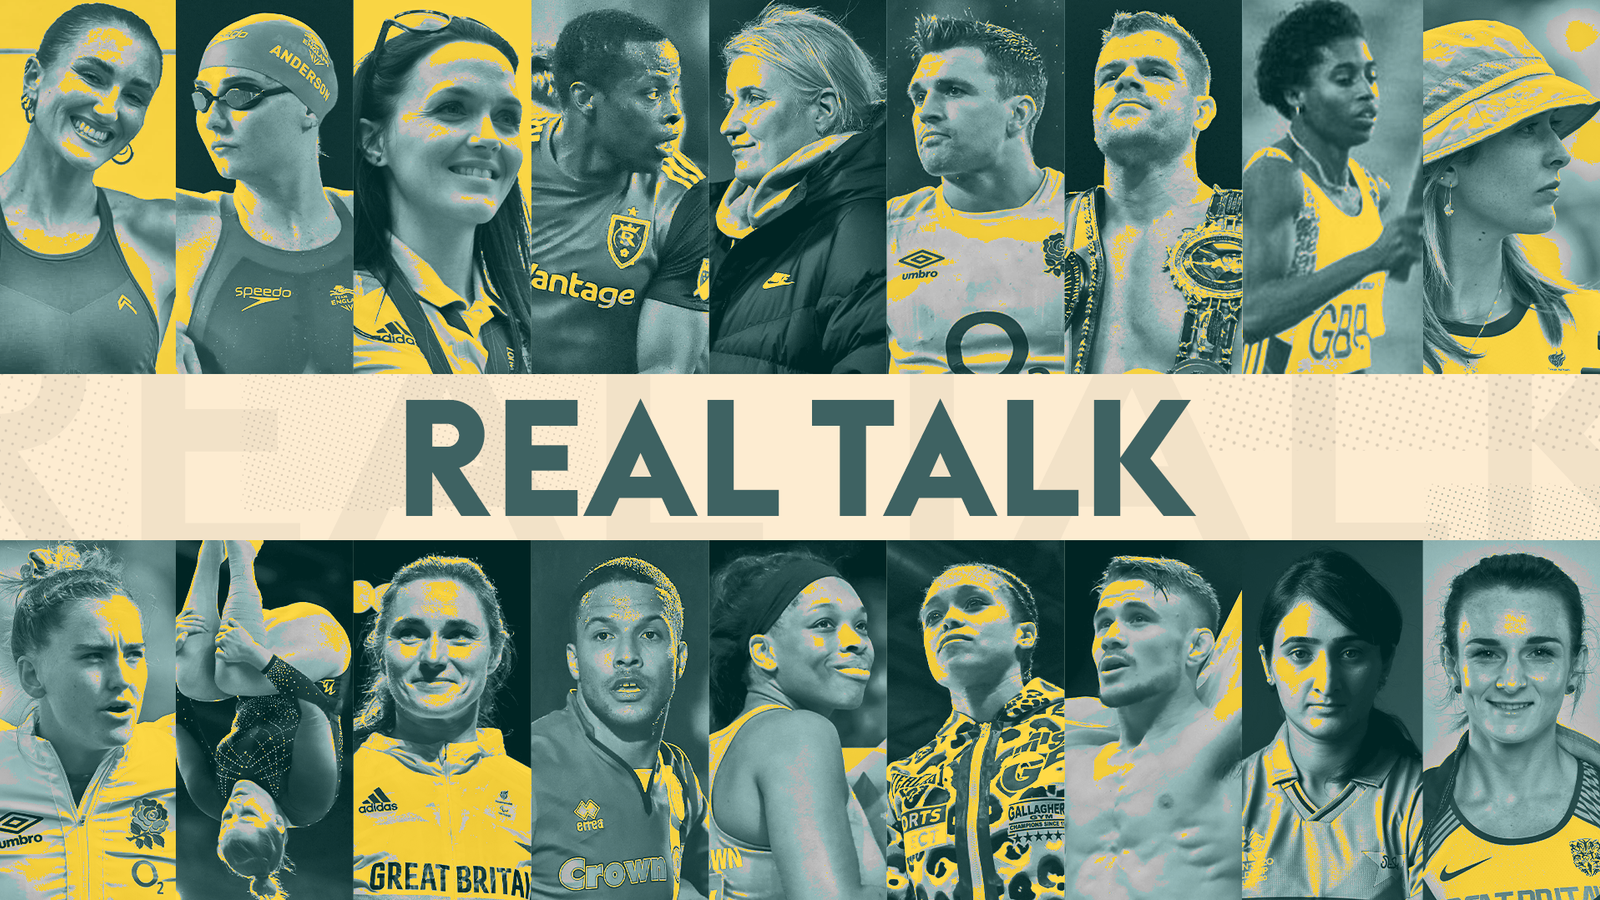 Real Talk - a fresh Sky Sports series that tackles difficult conversations